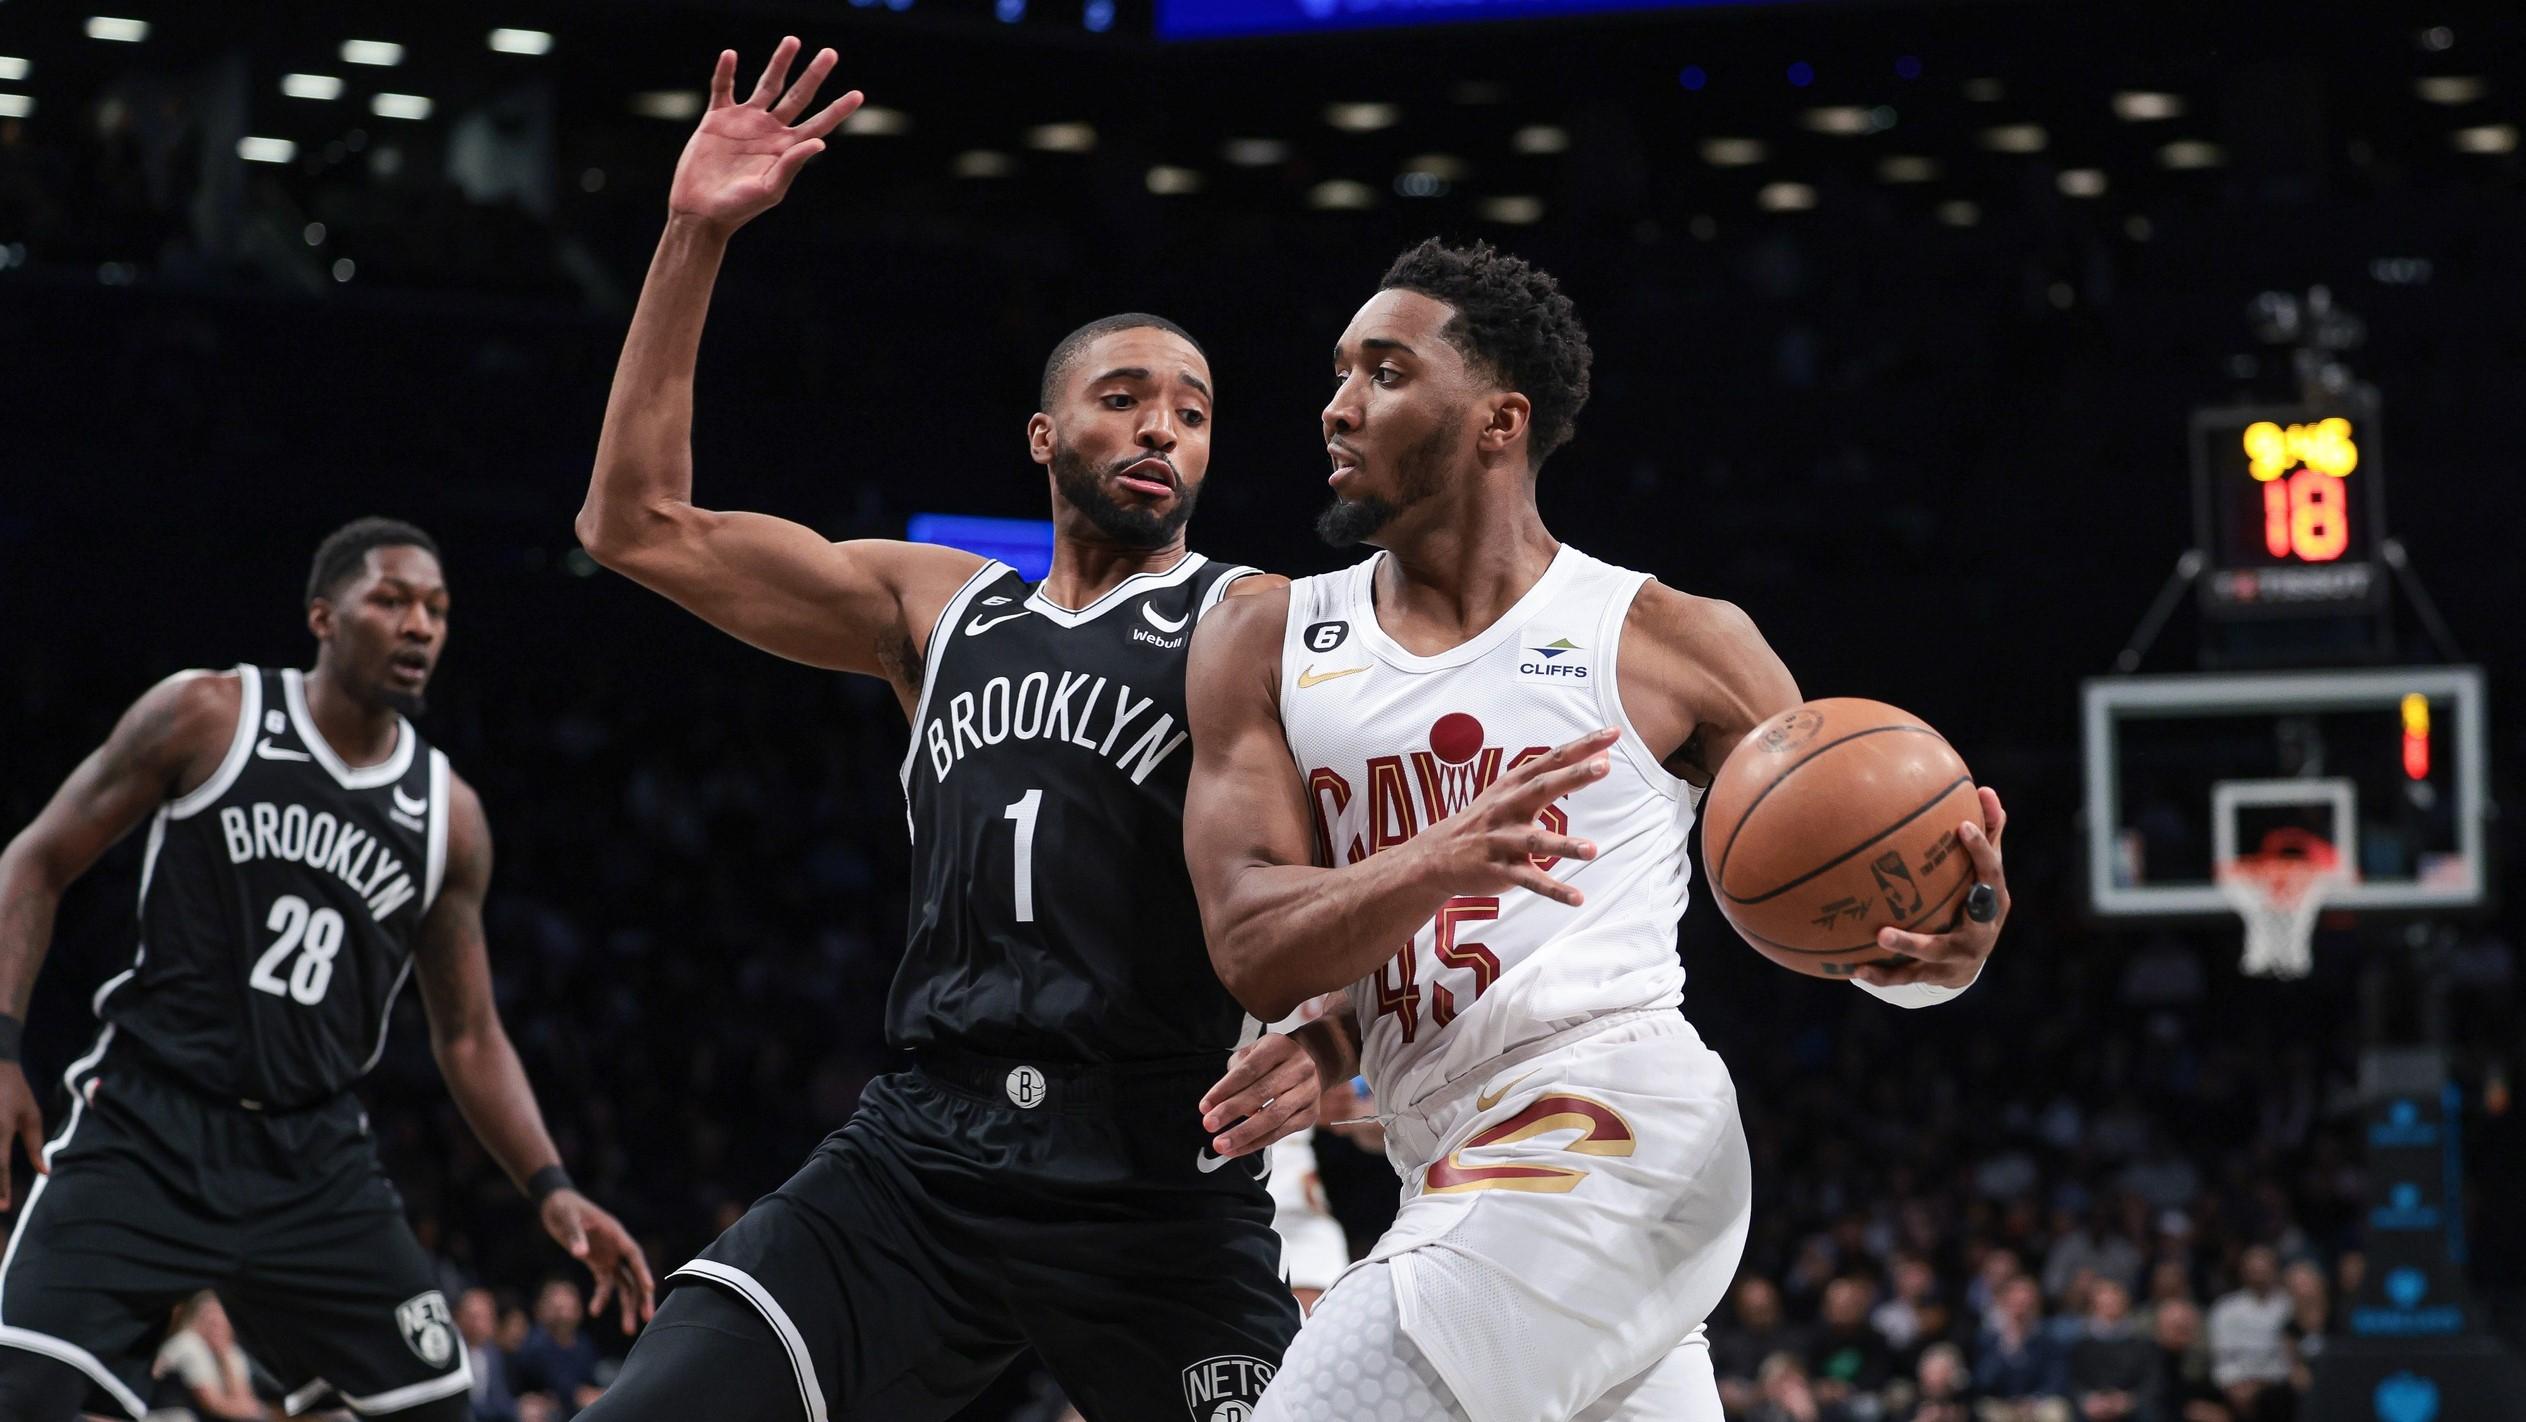 Mar 21, 2023; Brooklyn, New York, USA; Cleveland Cavaliers guard Donovan Mitchell (45) dribbles against Brooklyn Nets forward Mikal Bridges (1) during the first quarter at Barclays Center. / Vincent Carchietta-USA TODAY Sports